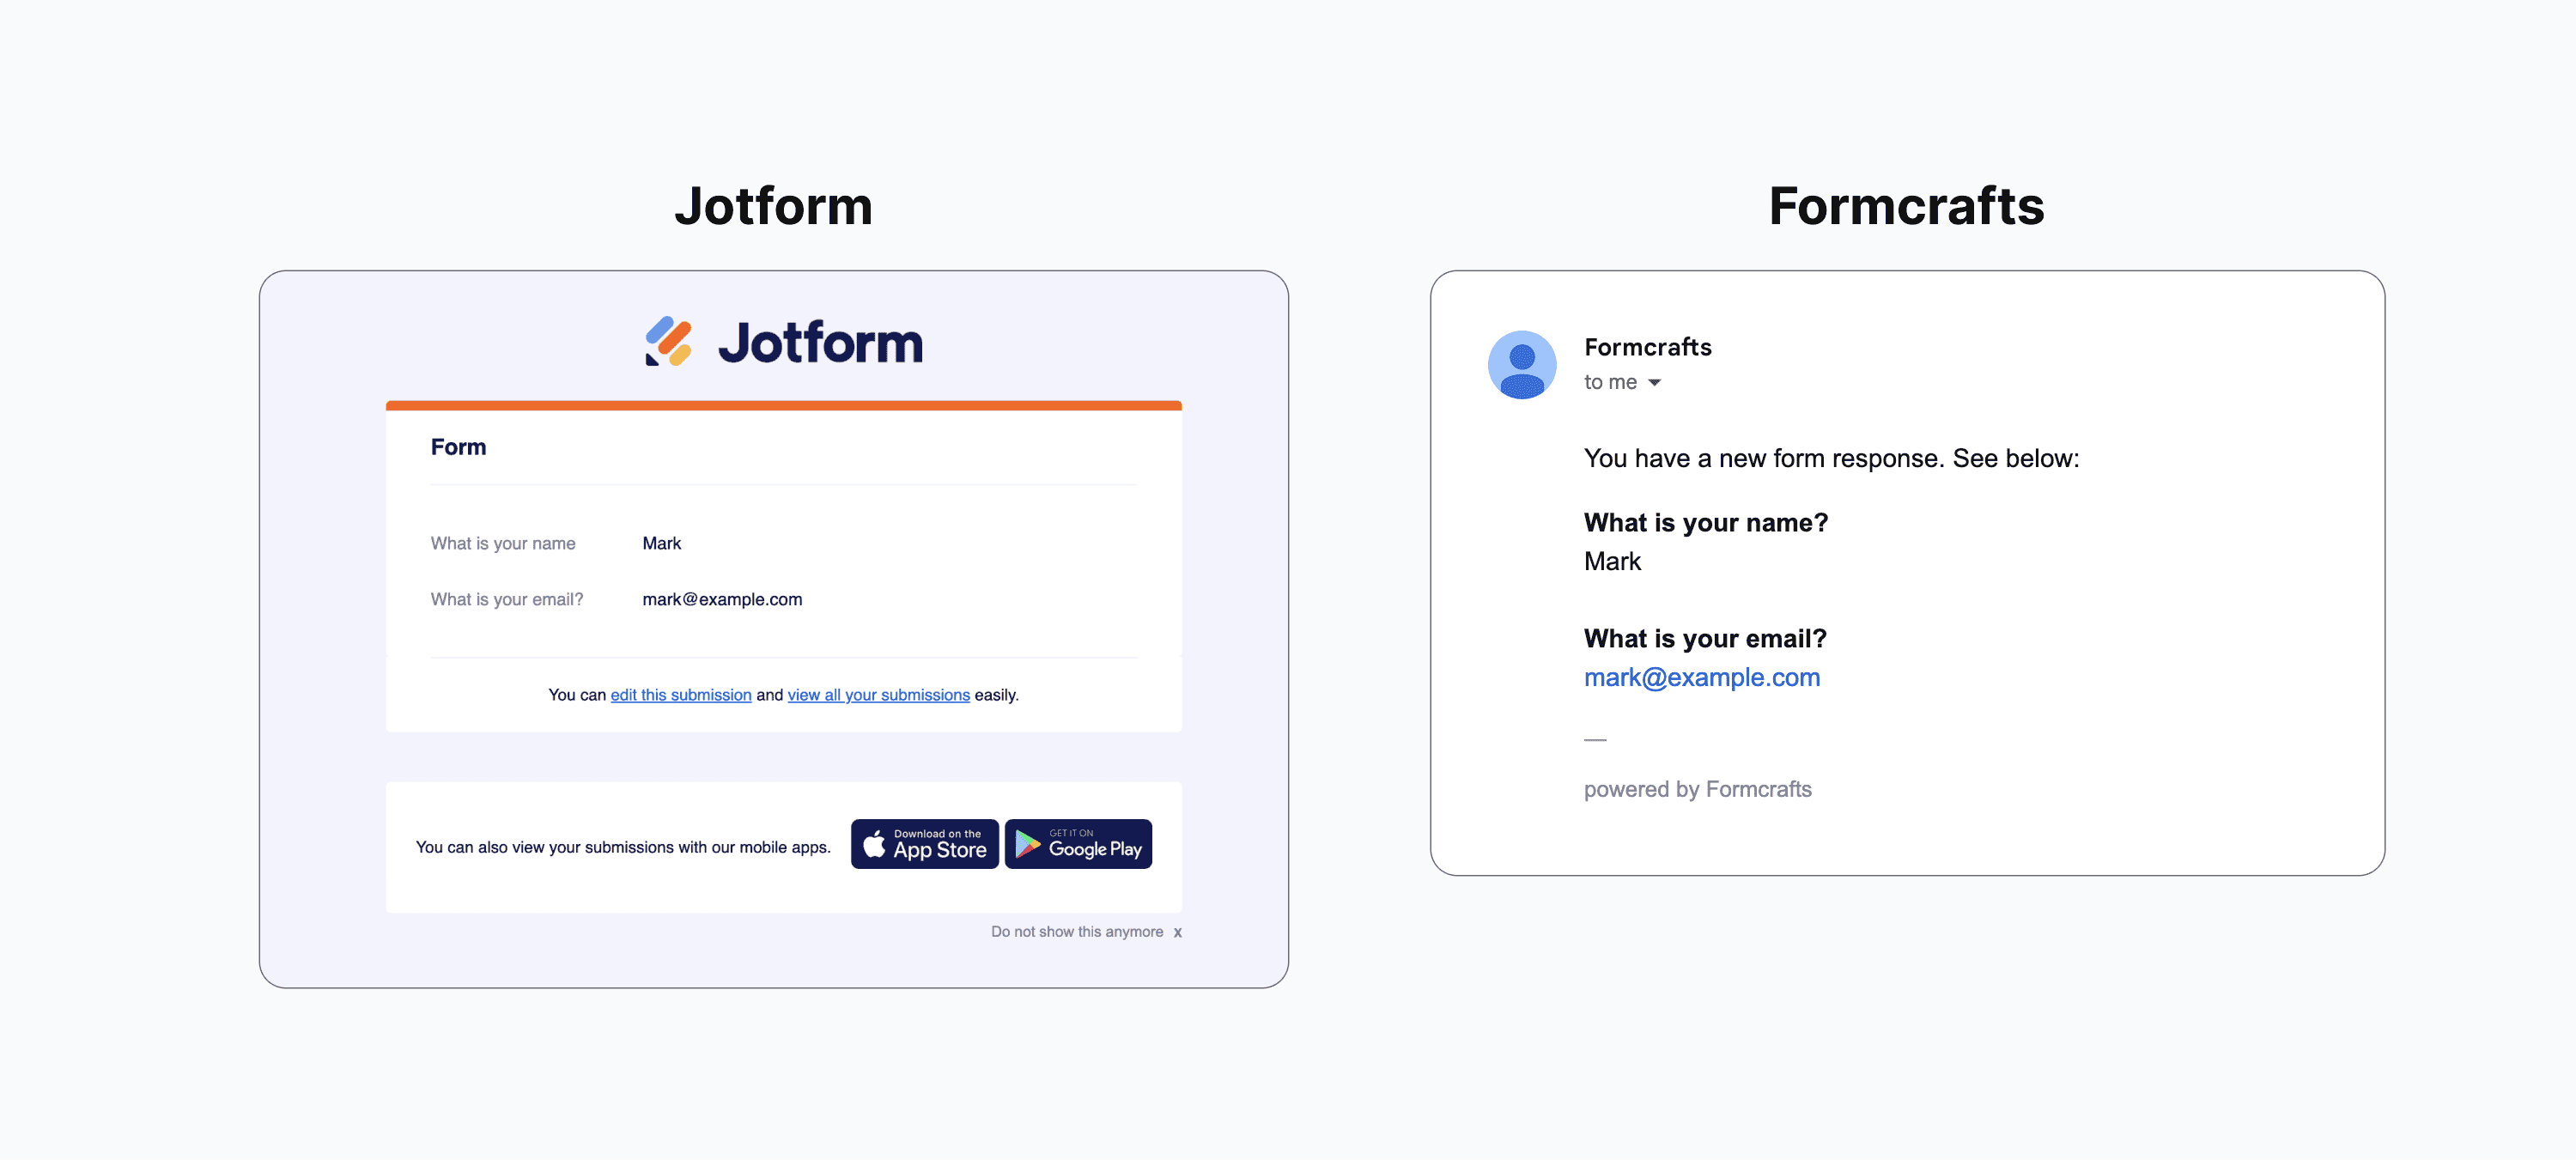 Formcrafts' and Jotform's branding on outgoing emails